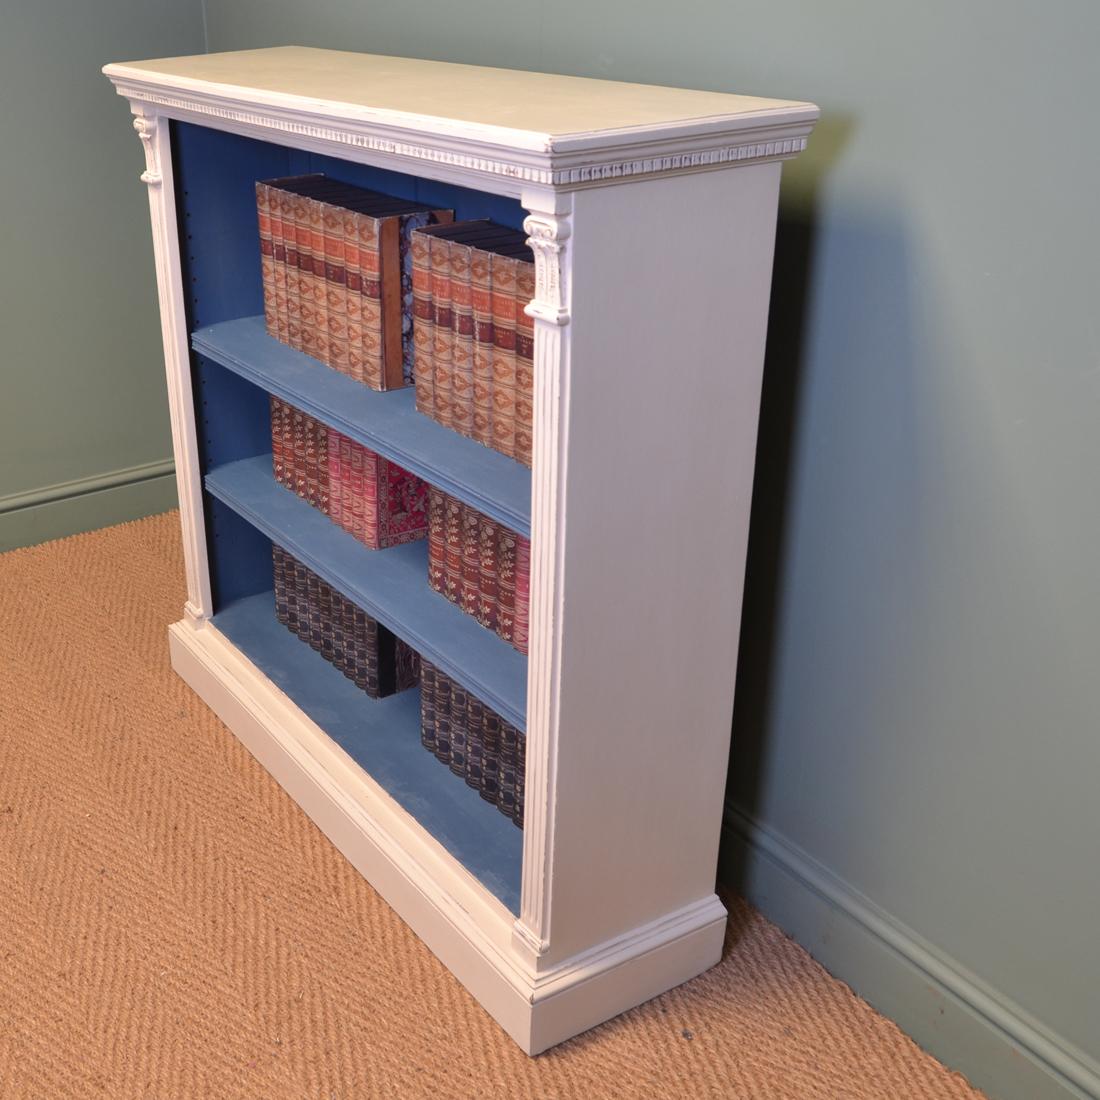 Stunning Victorian Quality Antique Painted Open Bookcase

This stunning painted open bookcase circa, 1880 has a rectangular moulded top with dental moulding above two adjustable shelves and the sides have moulded pilasters with quality carvings.